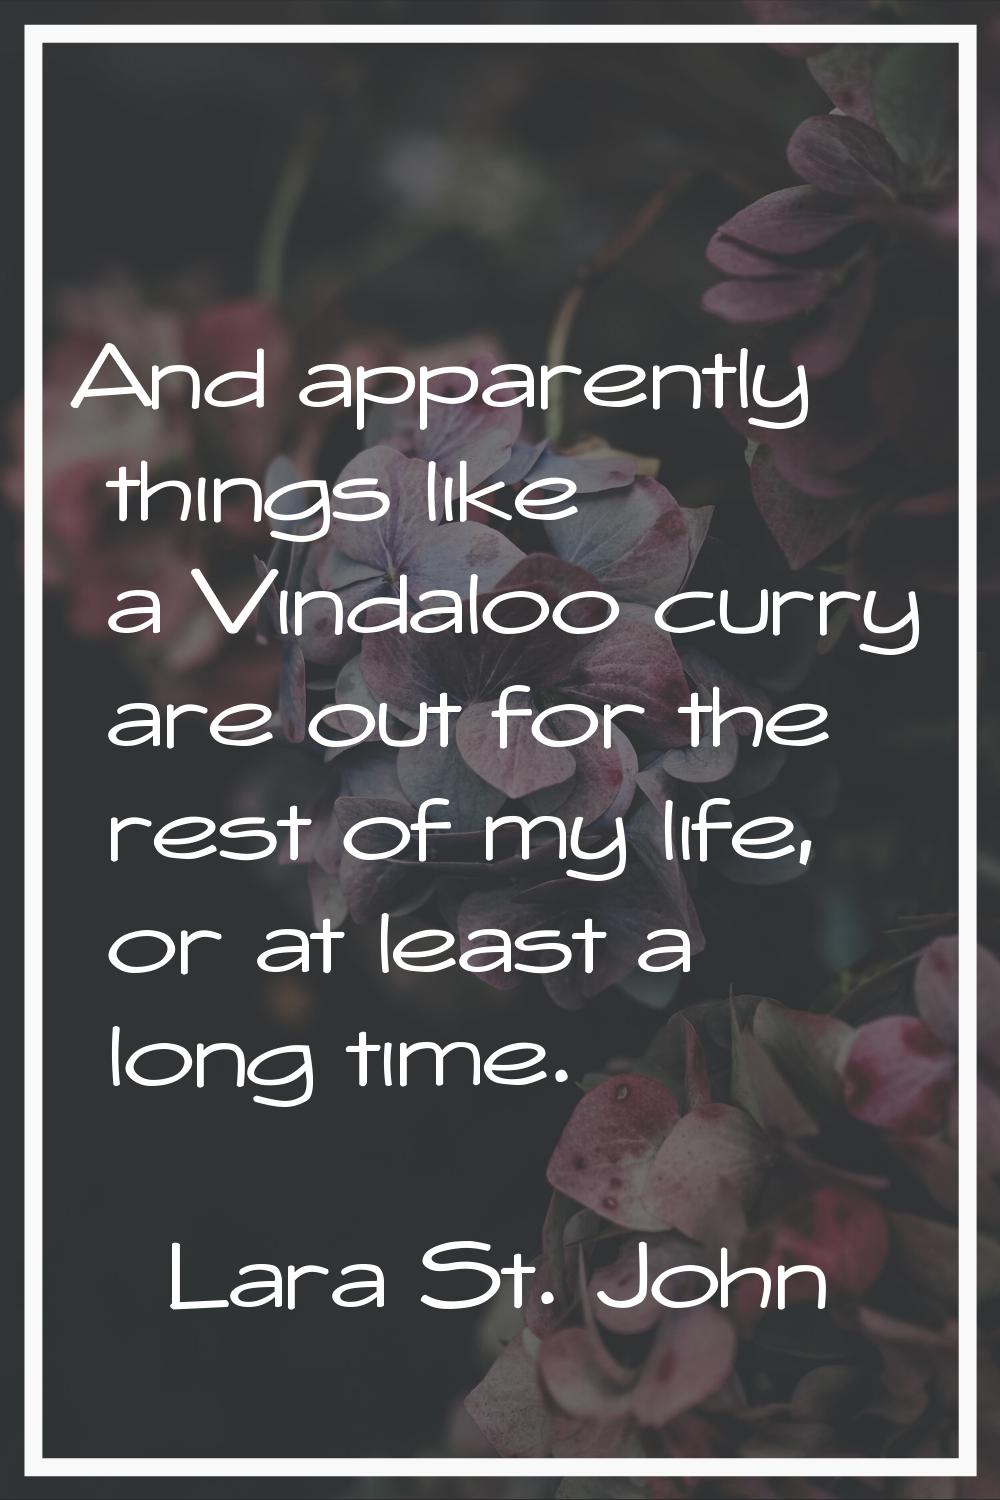 And apparently things like a Vindaloo curry are out for the rest of my life, or at least a long tim